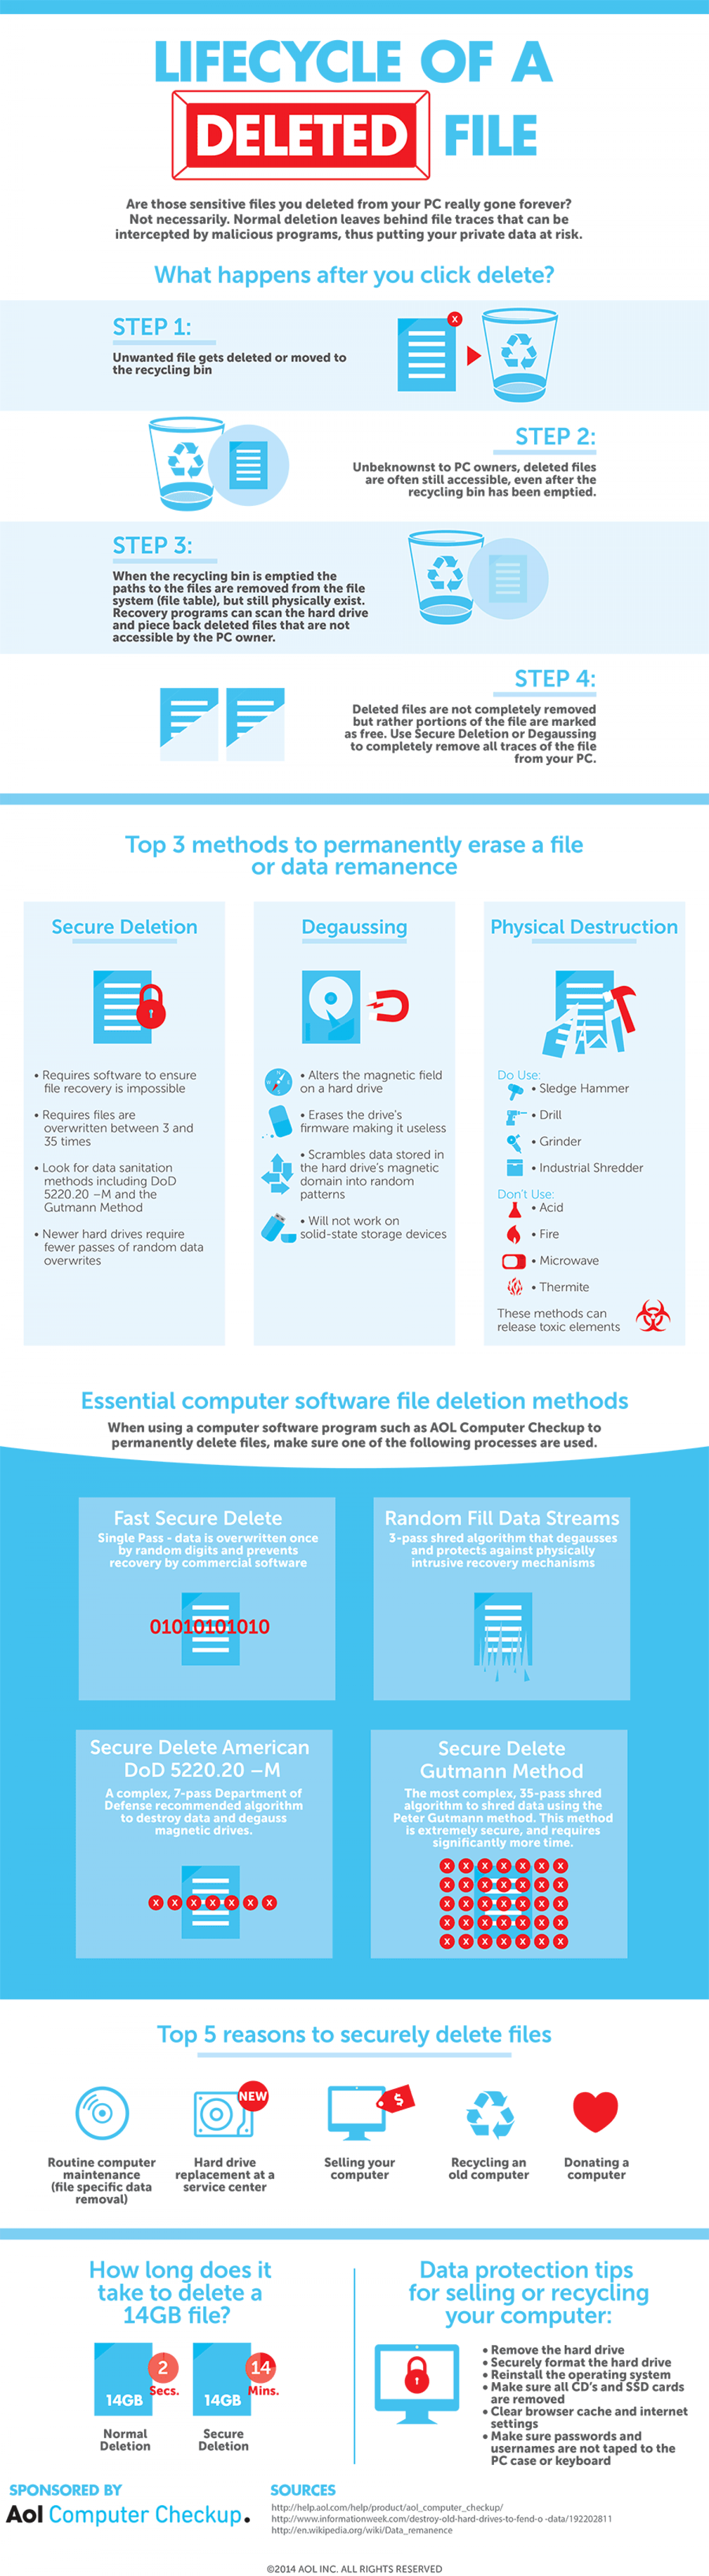 Lifecycle of a Deleted File Infographic